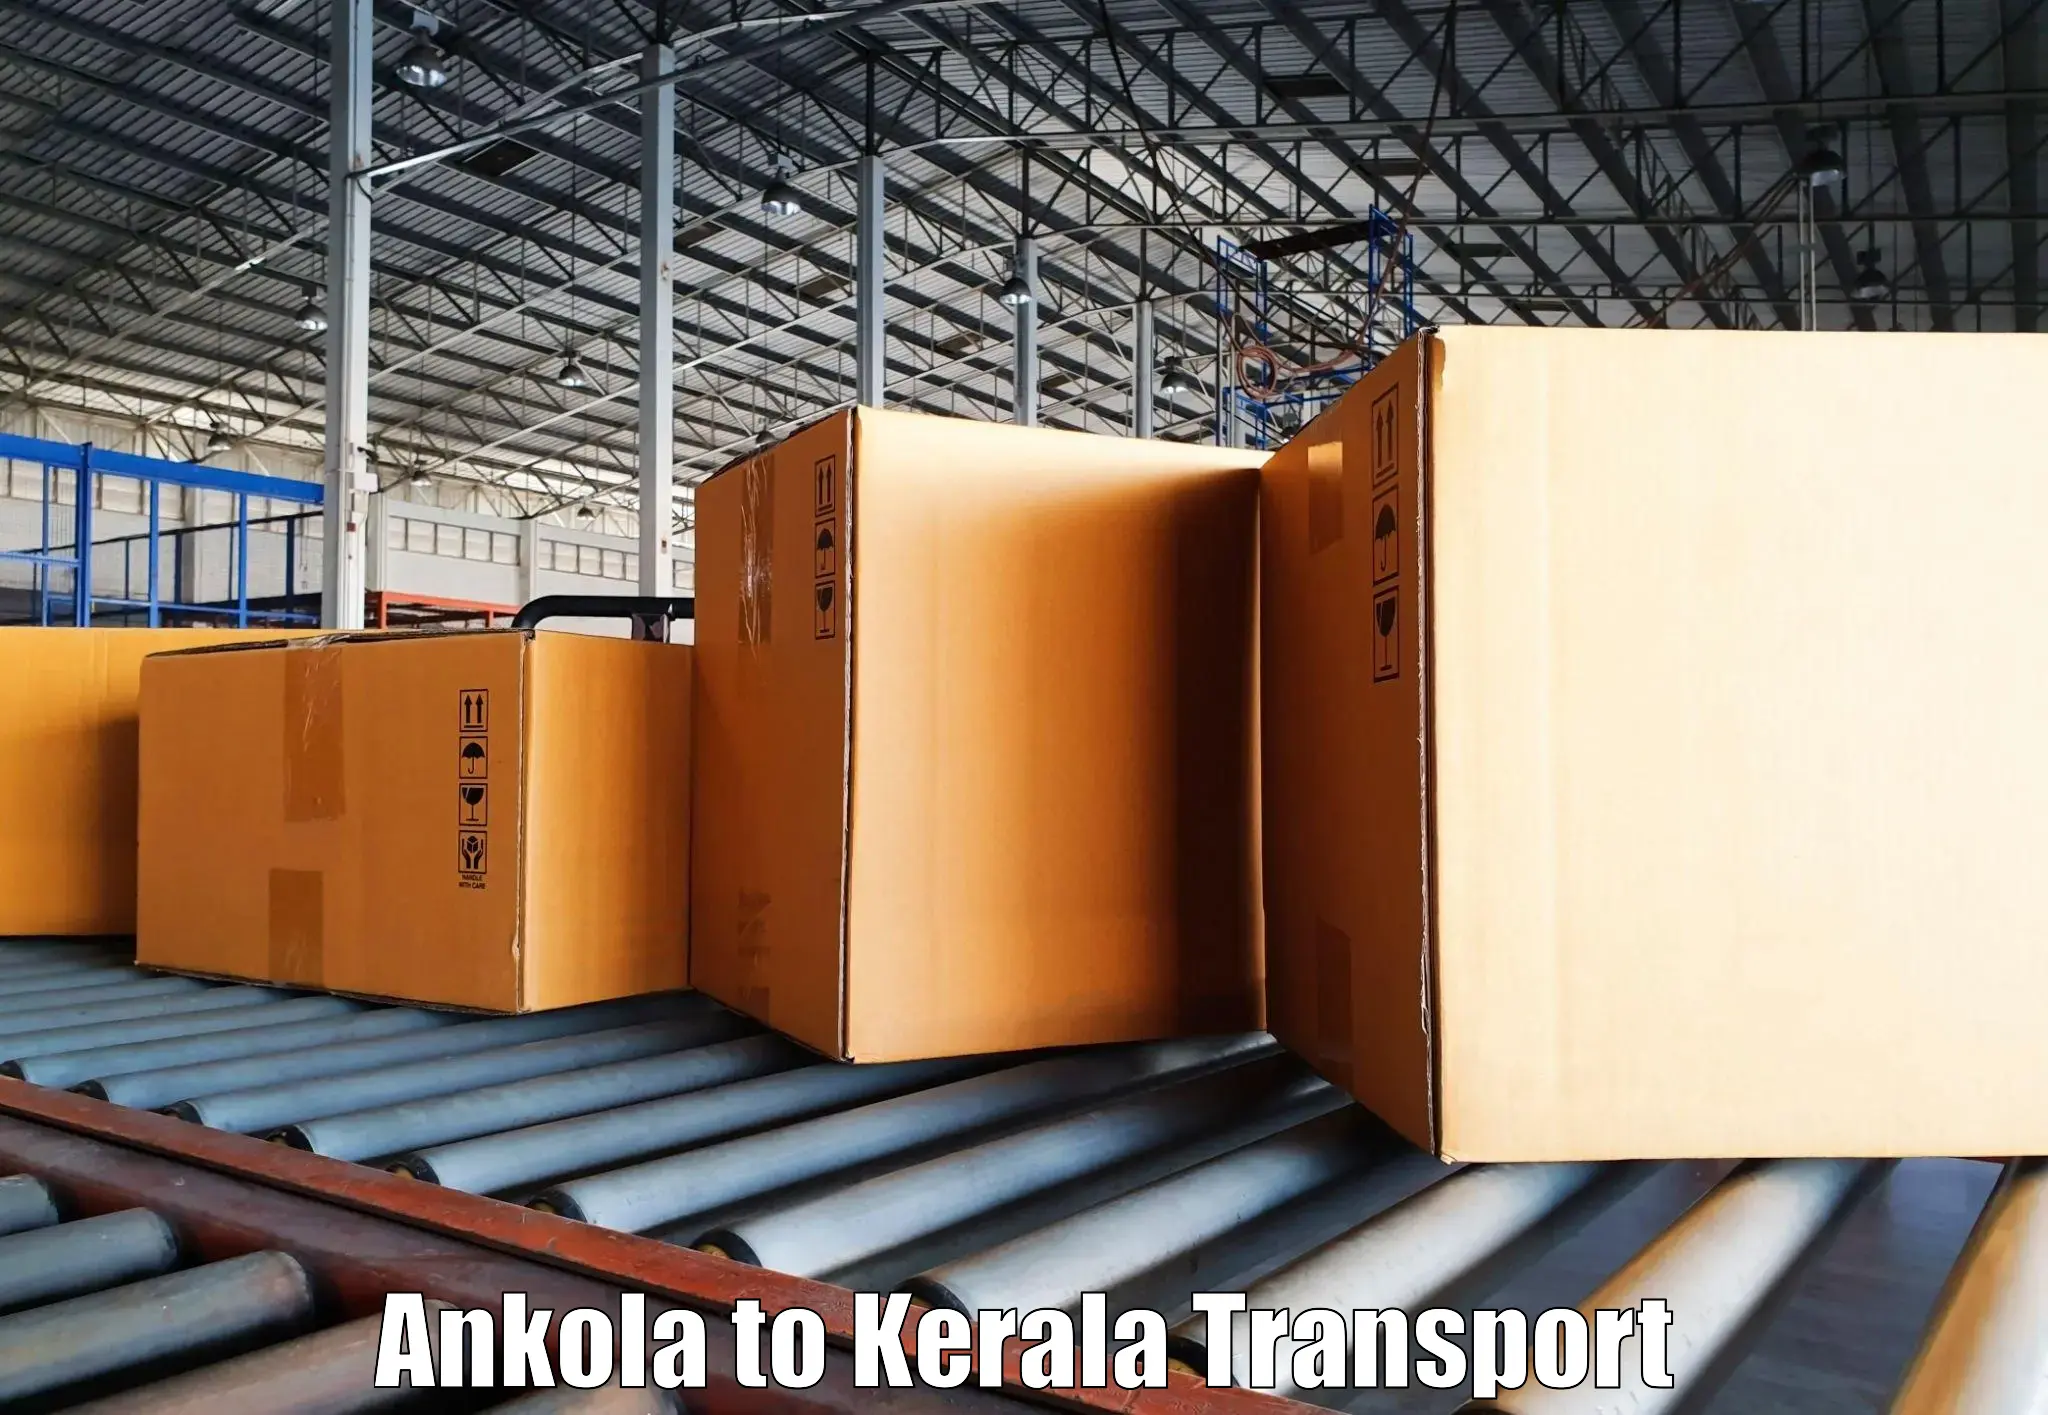 Transport bike from one state to another Ankola to Kerala